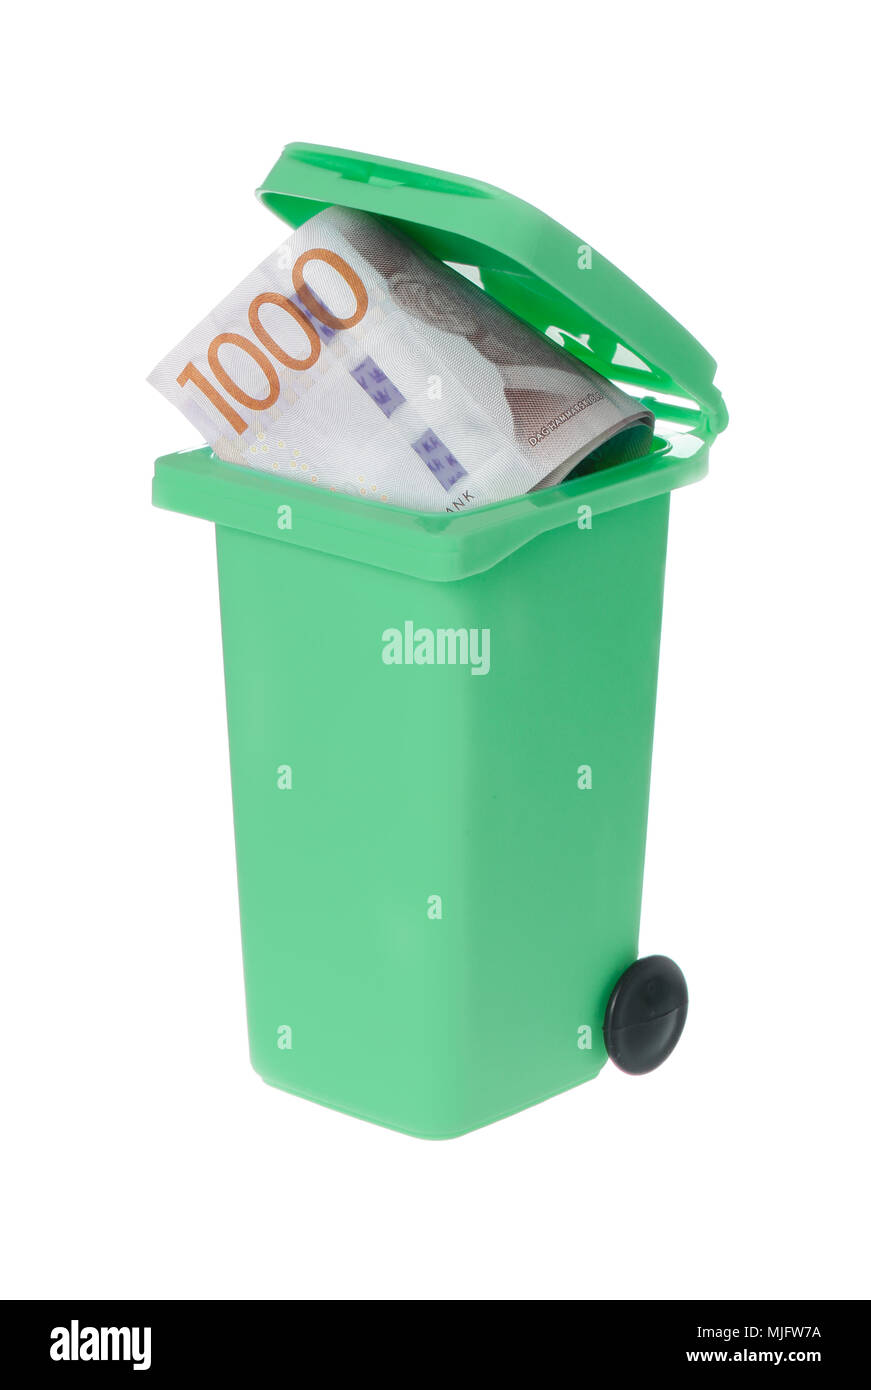 One green recycle bin with a wasted Swedish banknote 1000 krona visible inside isolated on white background. Stock Photo